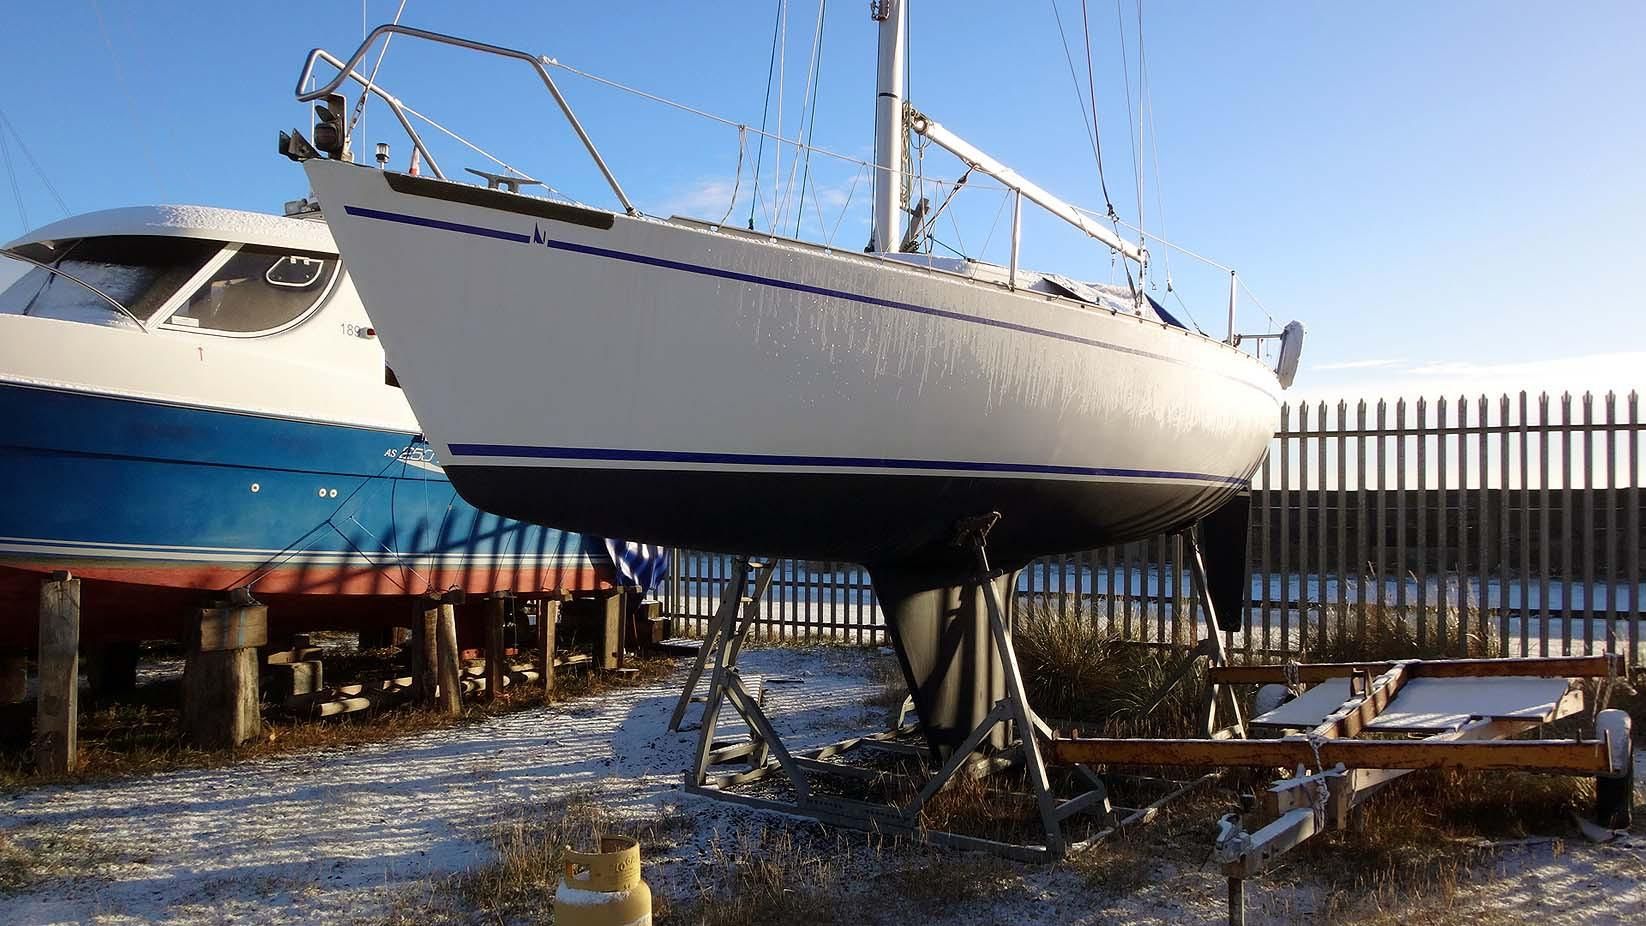 albin express sailboat for sale